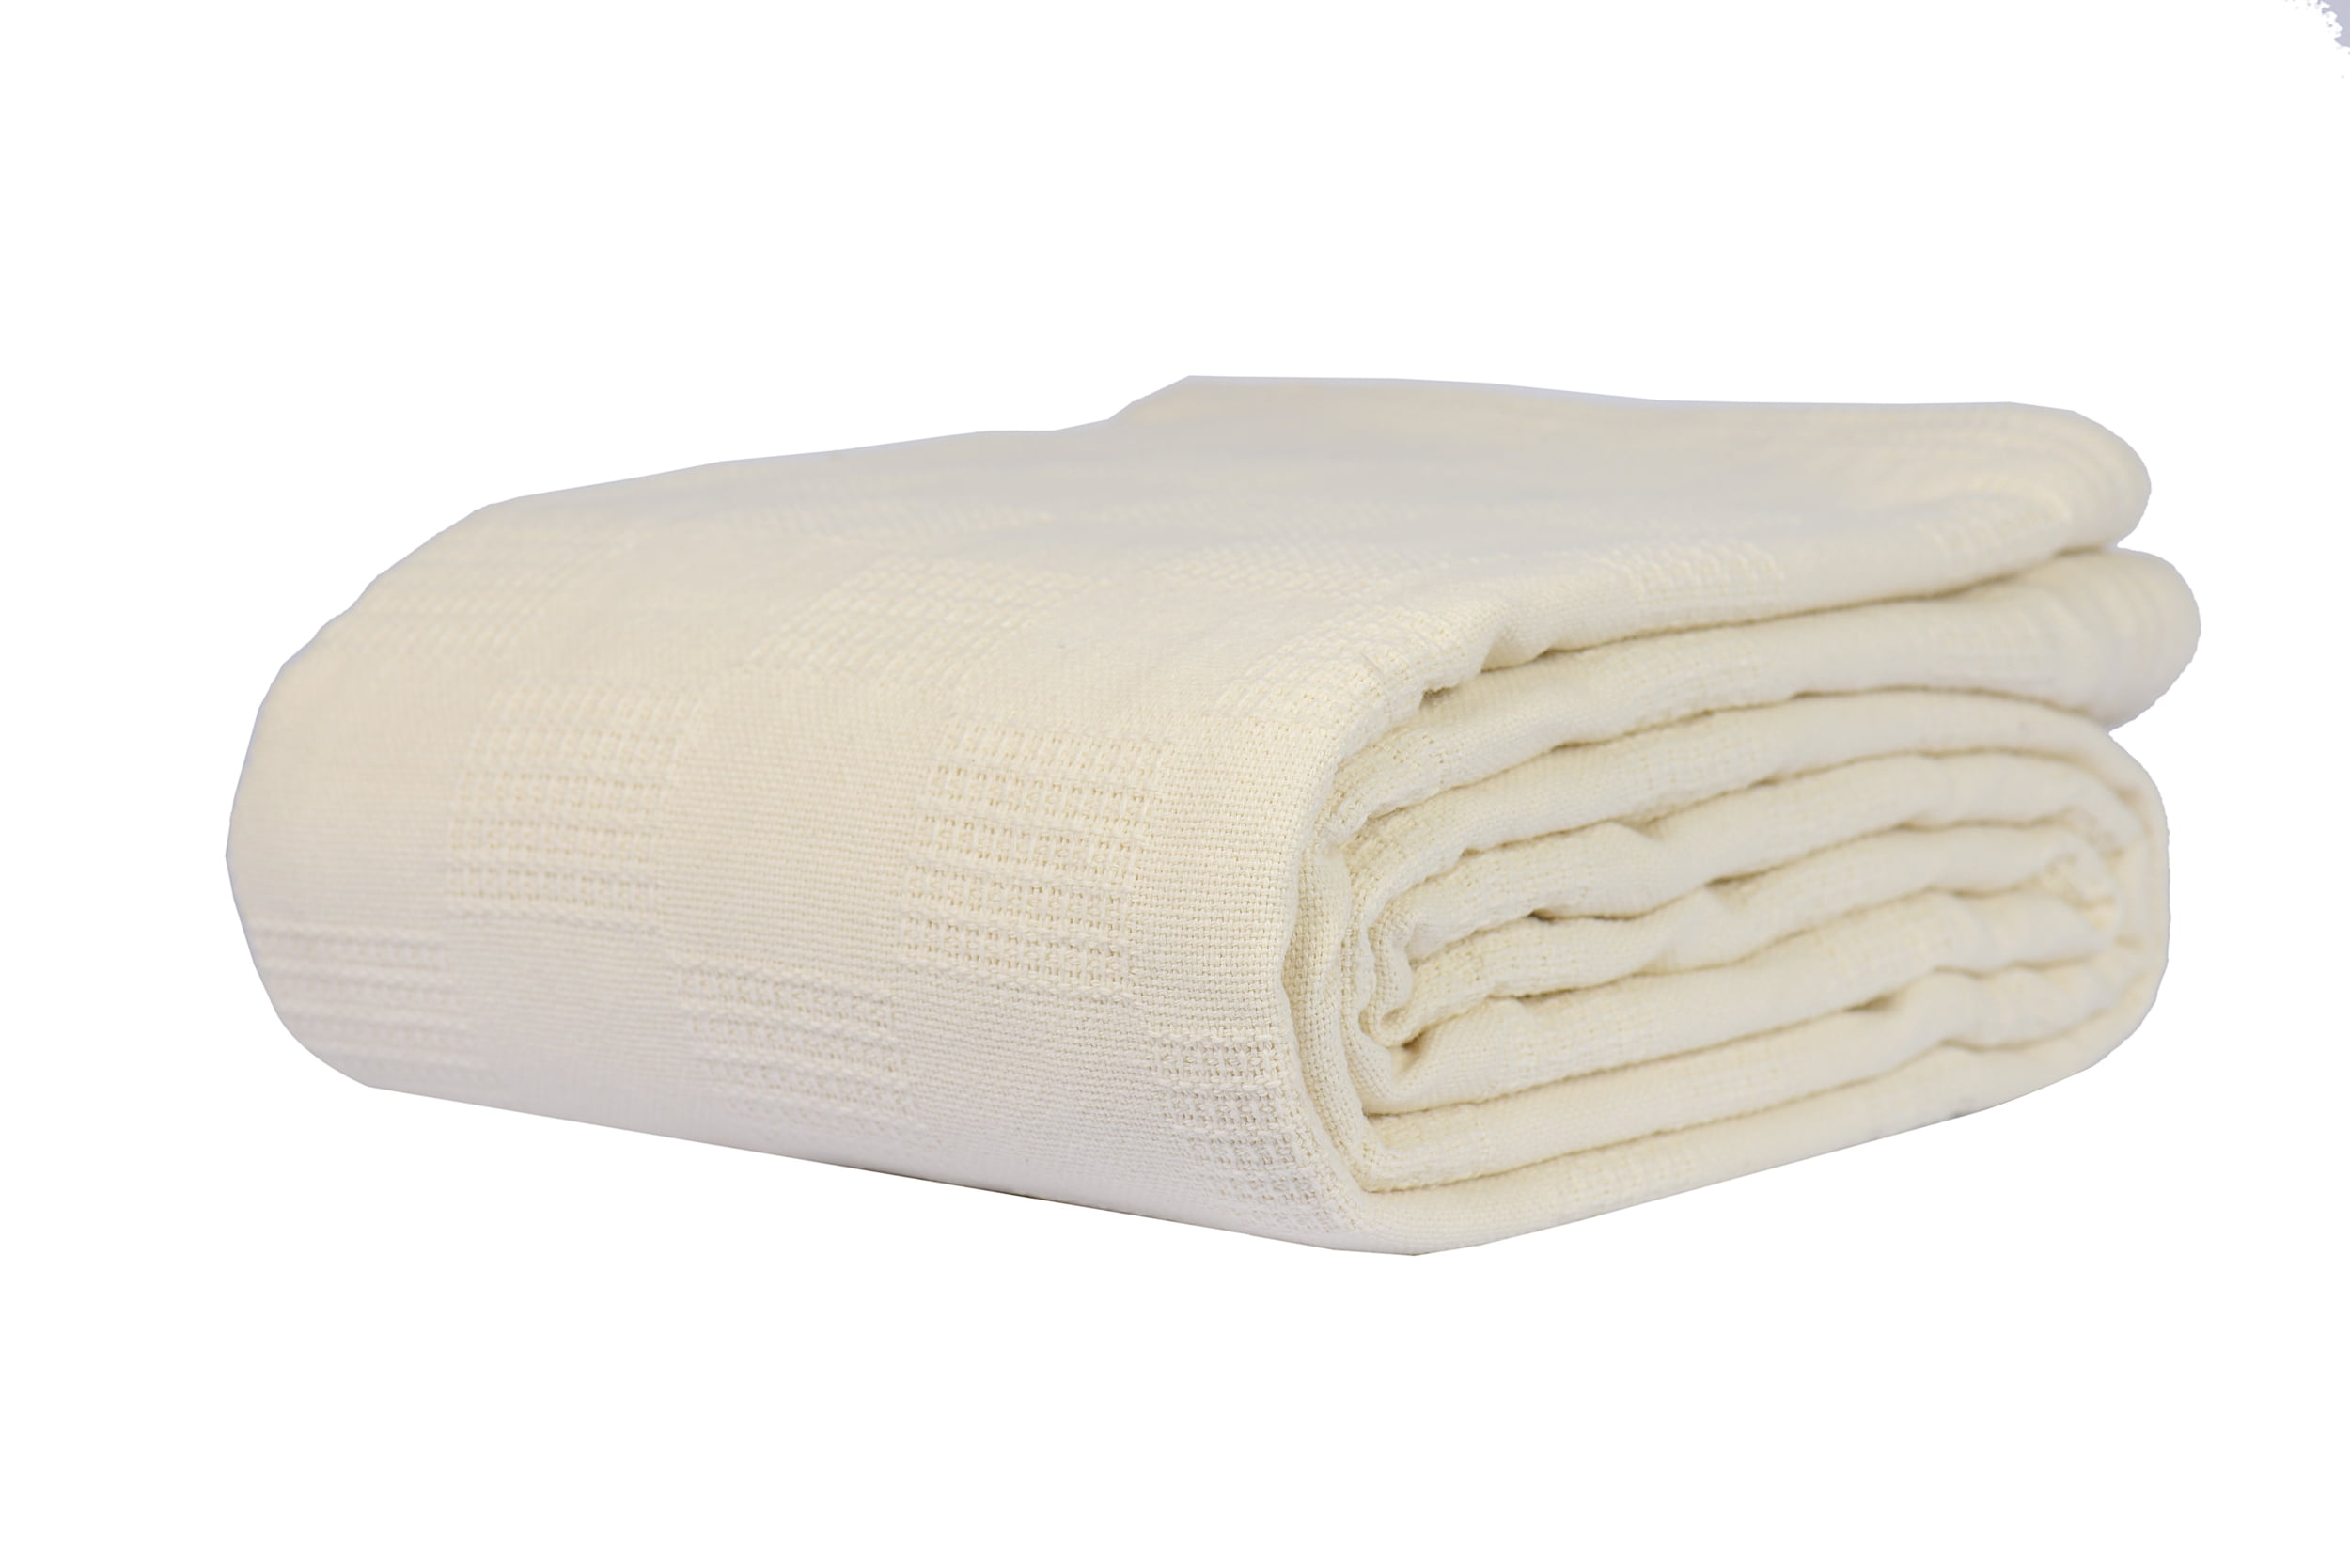 Linteum Textile Hospital Thermal Cotton SNAGLESS Blanket, (74x100 in, 100% White) Spread